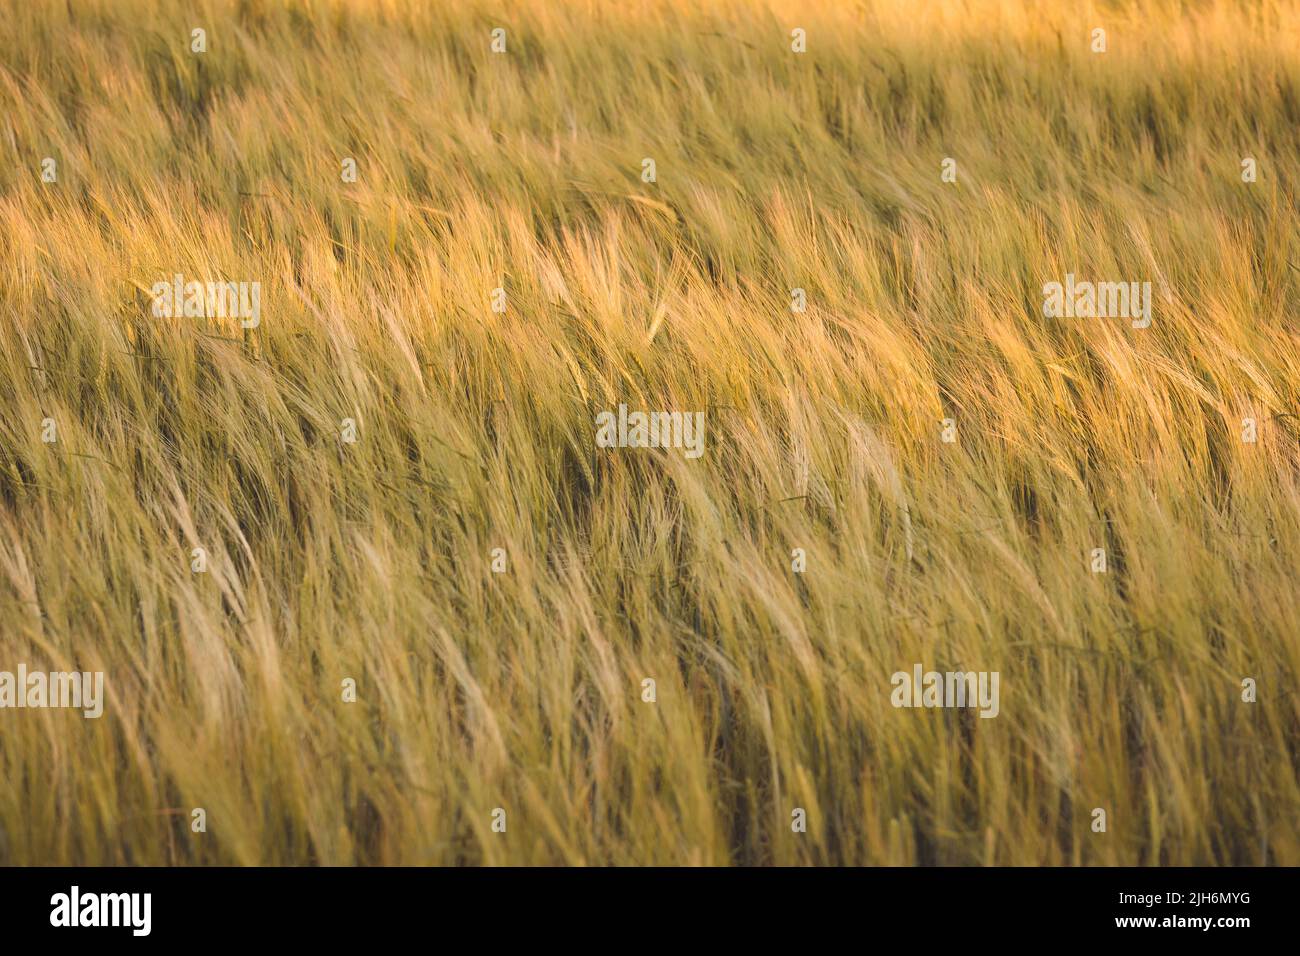 Golden Wheat Field Blowing in the Wind Stock Photo